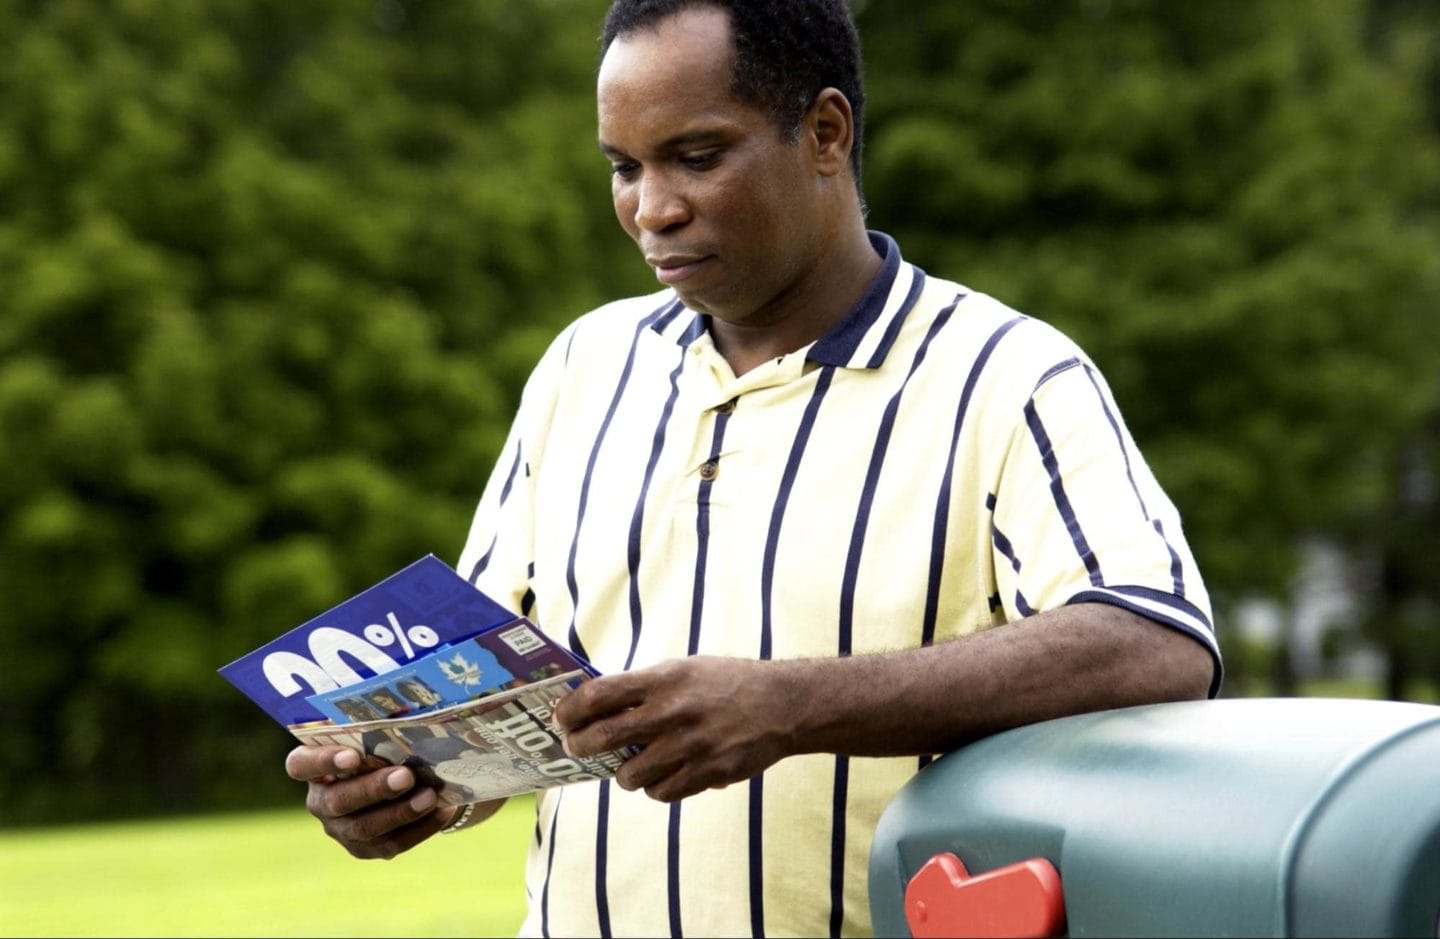 A man in a striped shirt getting mail from his mailbox and looking at the direct mail advertising pieces.